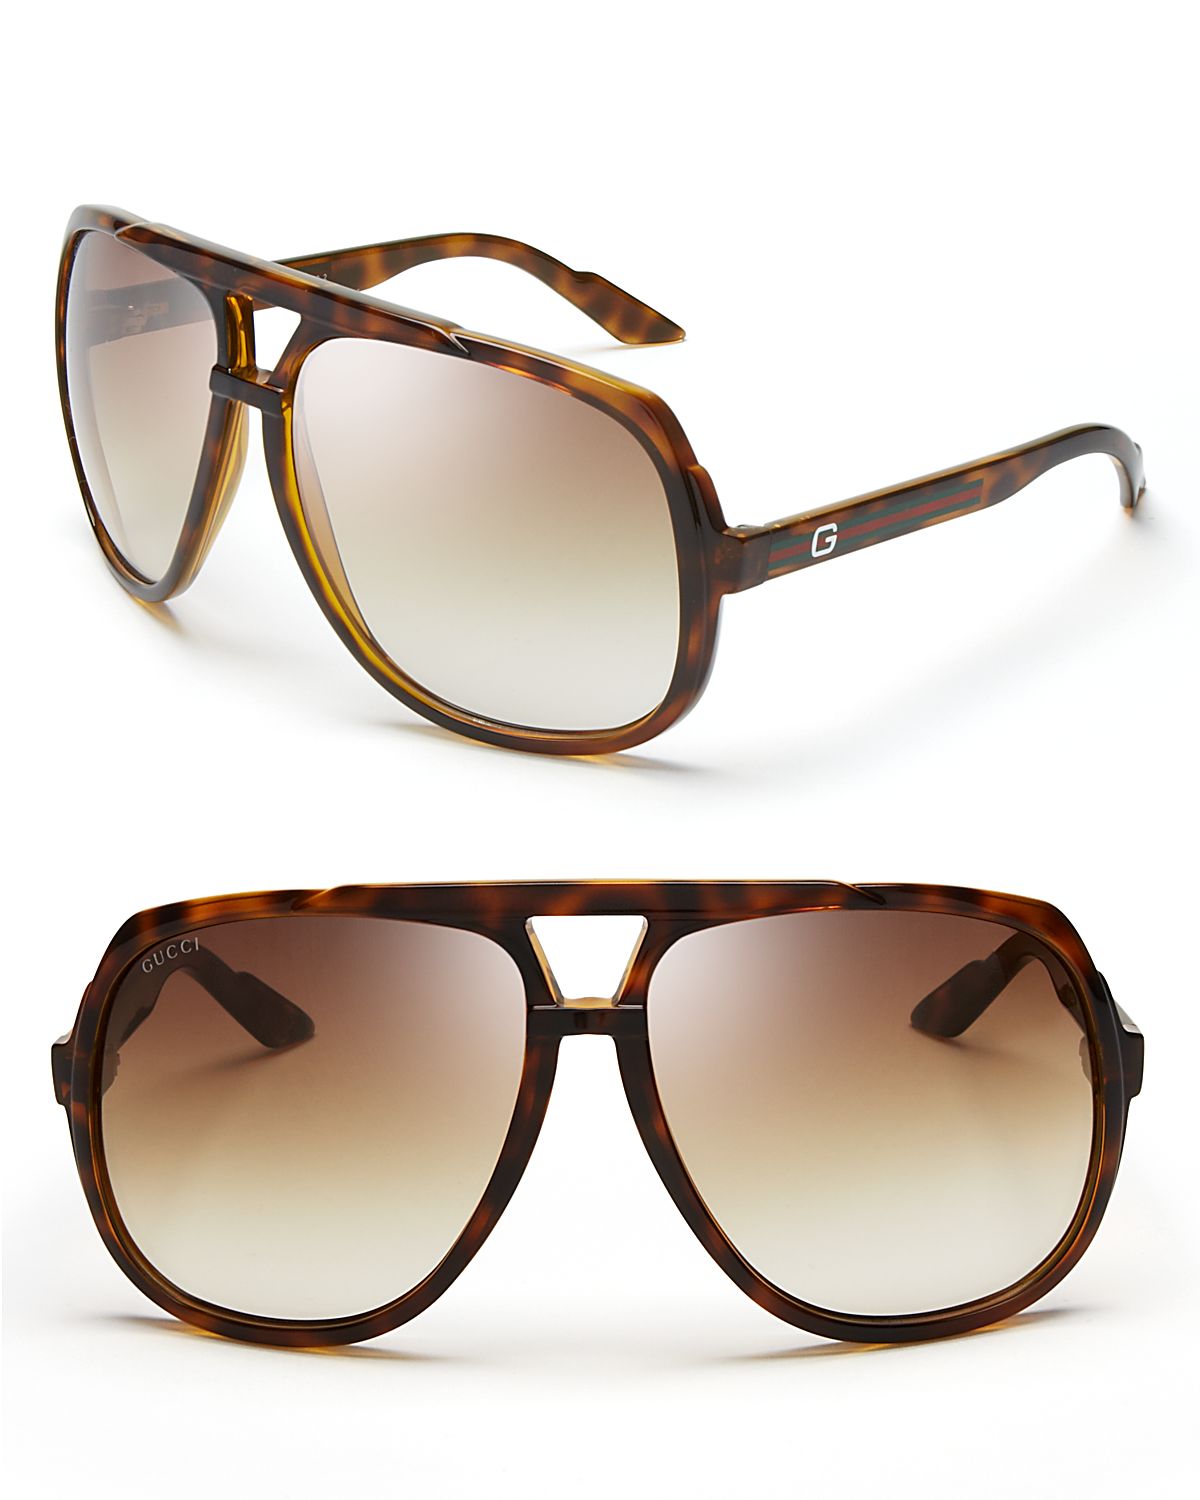 Gucci Oversized Aviator Sunglasses in Brown for Men - Lyst